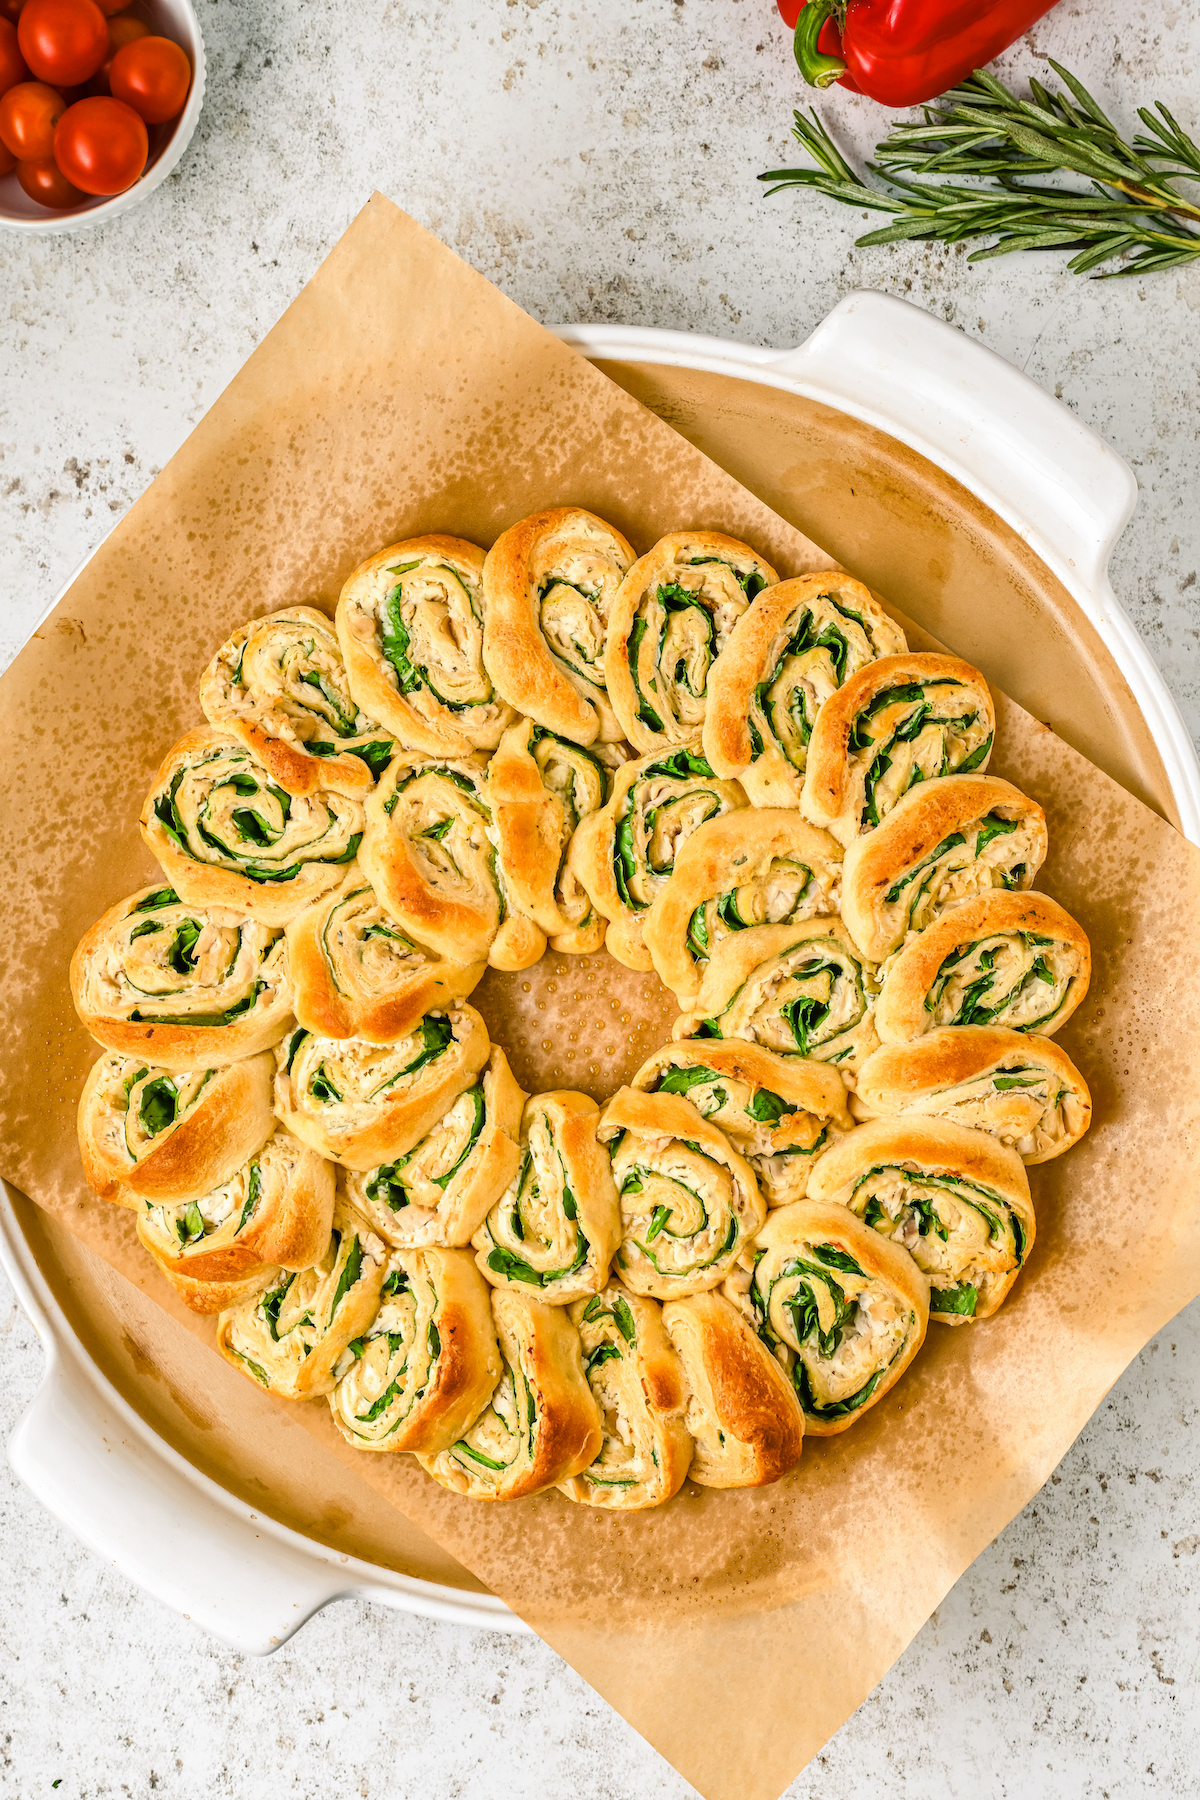 A baked pinwheel wreath made of crescent roll dough and filling.